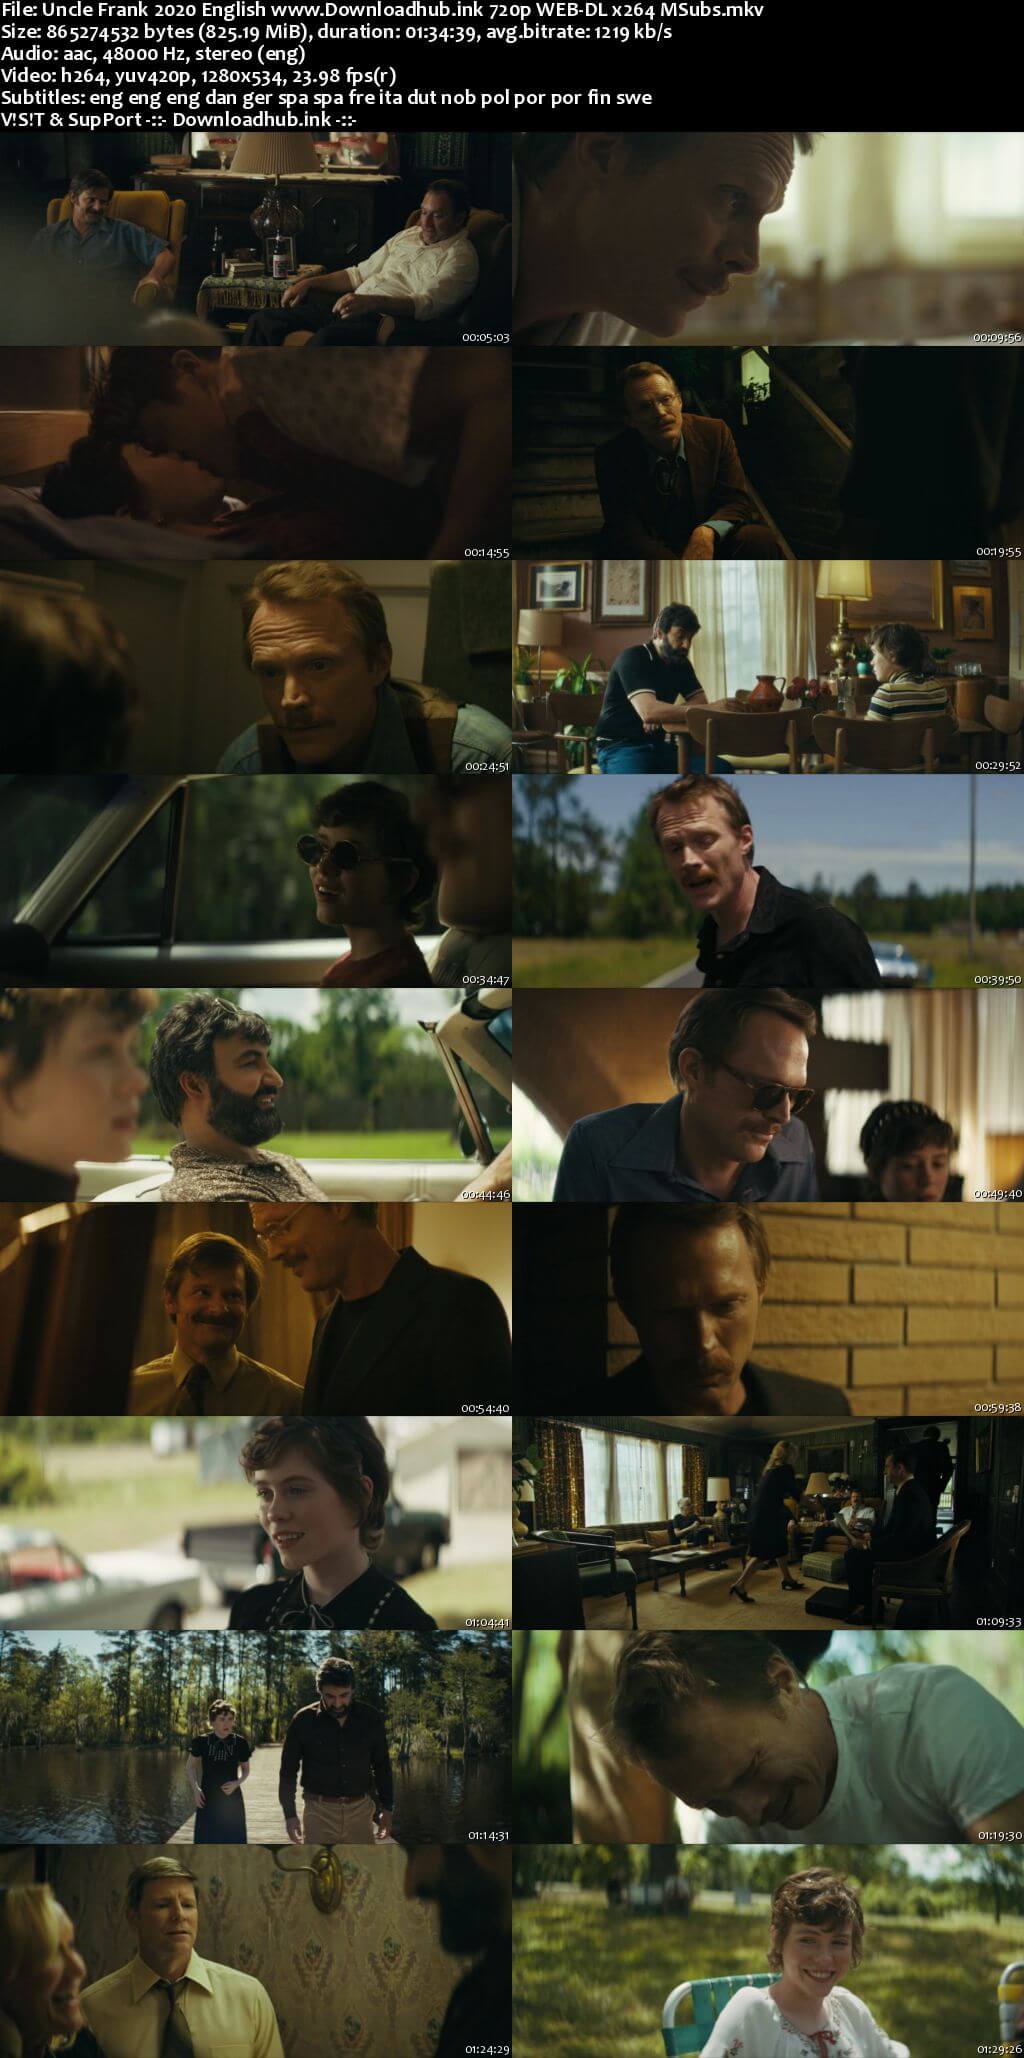 Uncle Frank 2020 English 720p Web-DL 800MB MSubs